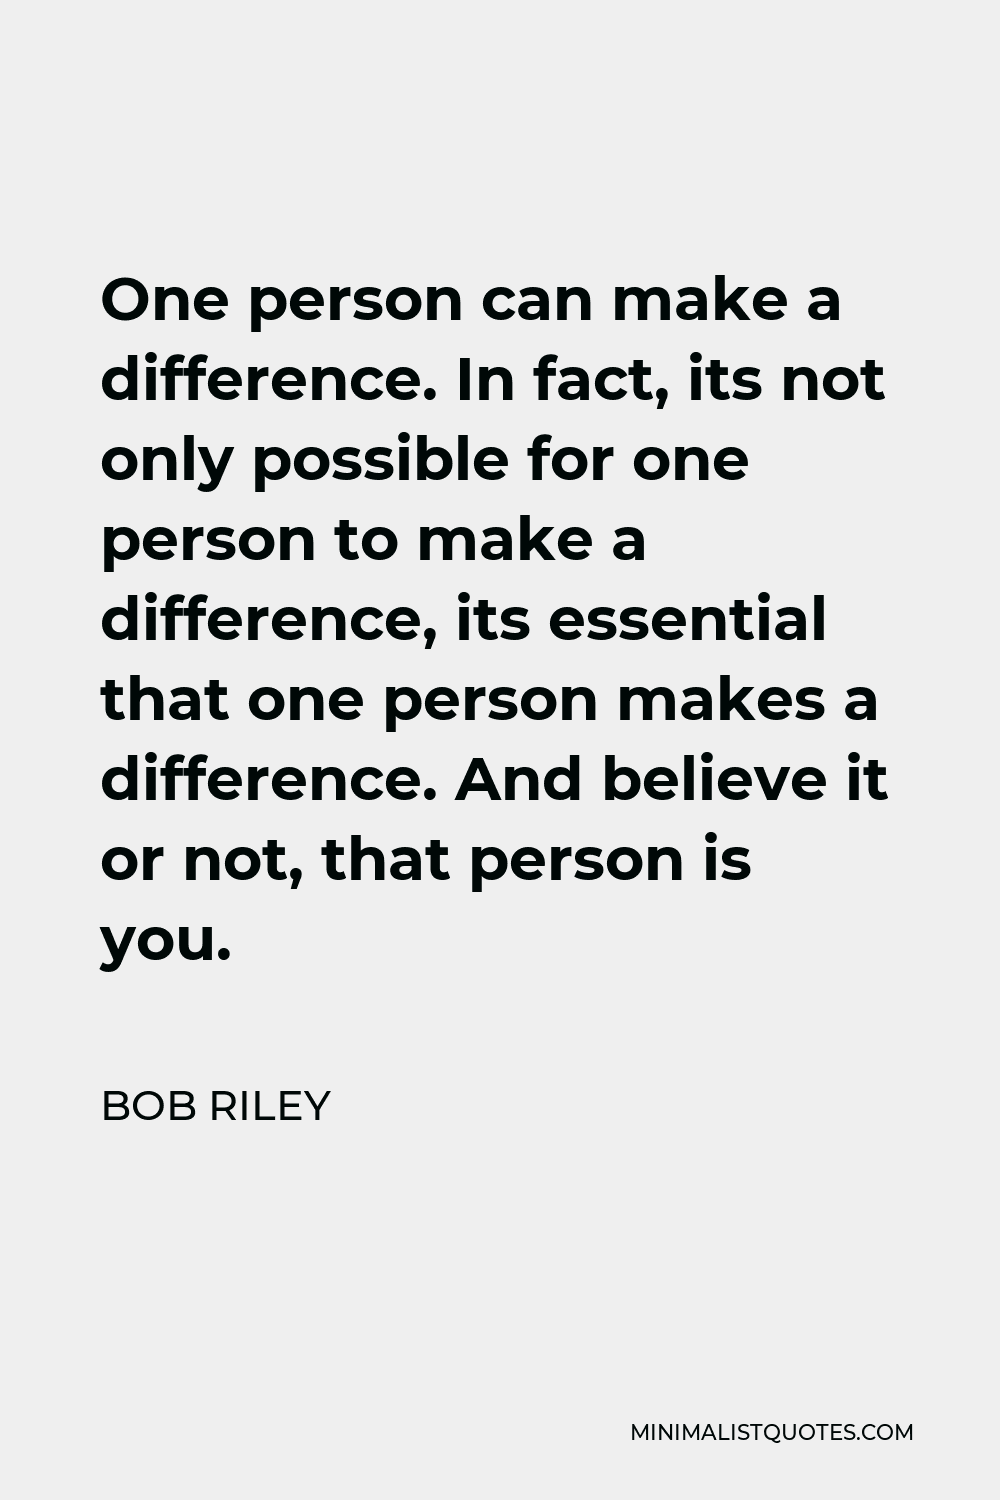 Bob Riley Quote - One person can make a difference. In fact, its not only possible for one person to make a difference, its essential that one person makes a difference. And believe it or not, that person is you.